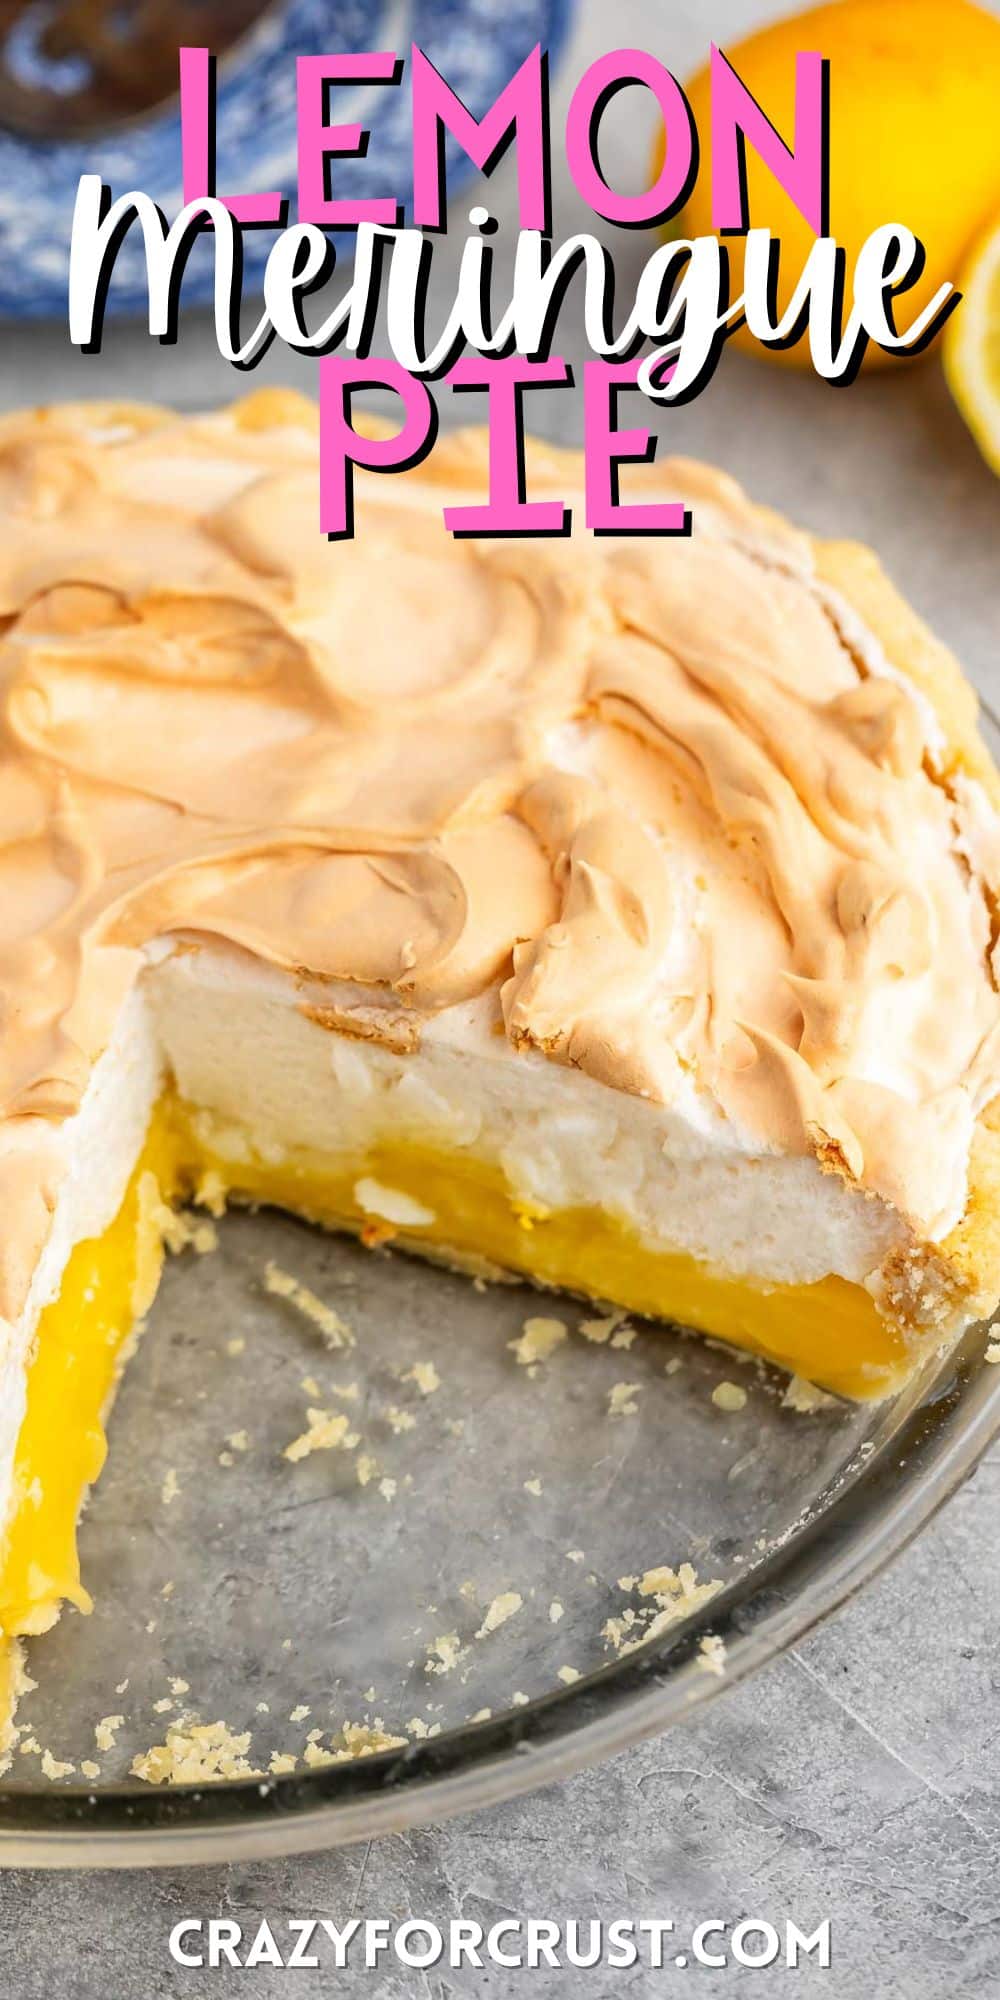 lemon pie in clear pie plate with meringue on top with words on the image.